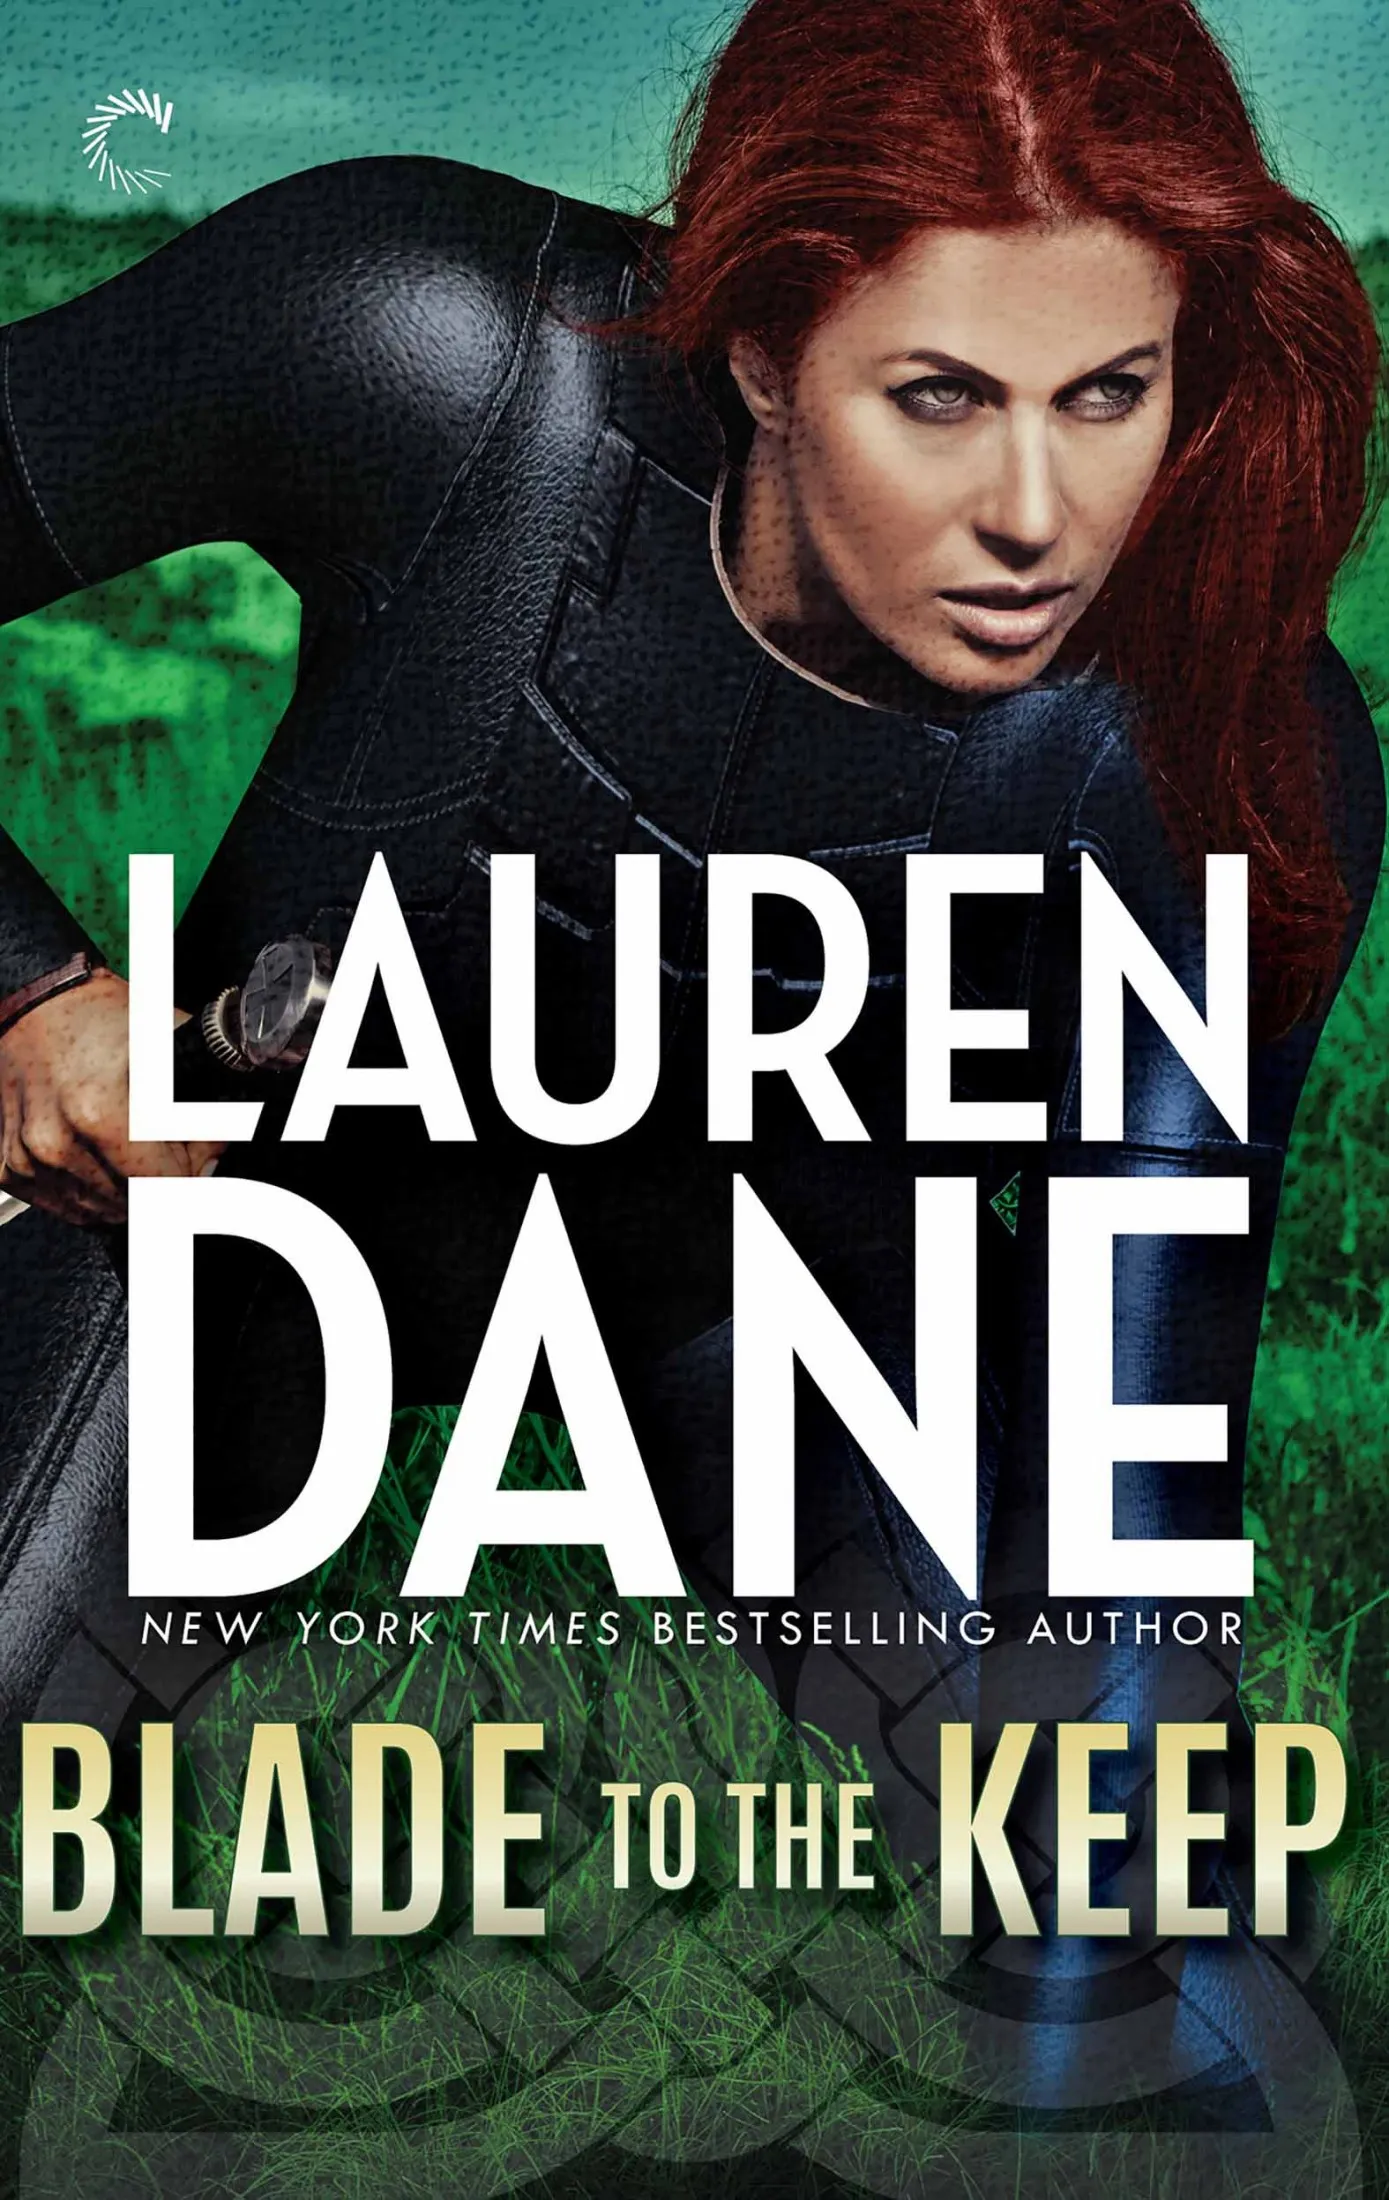 Blade To the Keep (Goddess with a Blade #2)